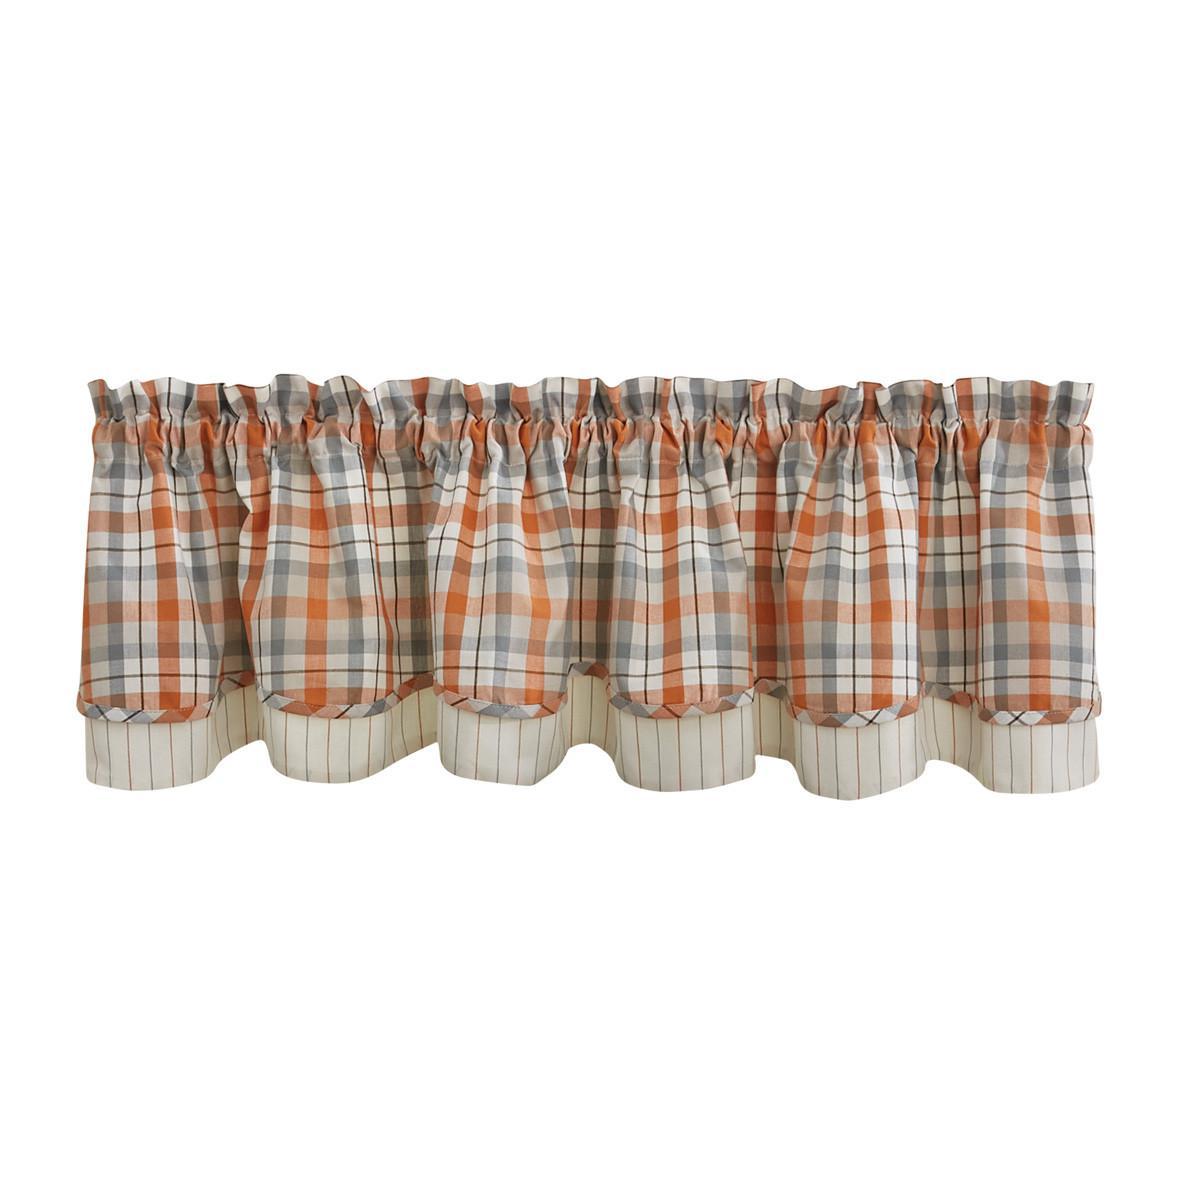 Park Design Apricot & Stone Lined Layered Valance